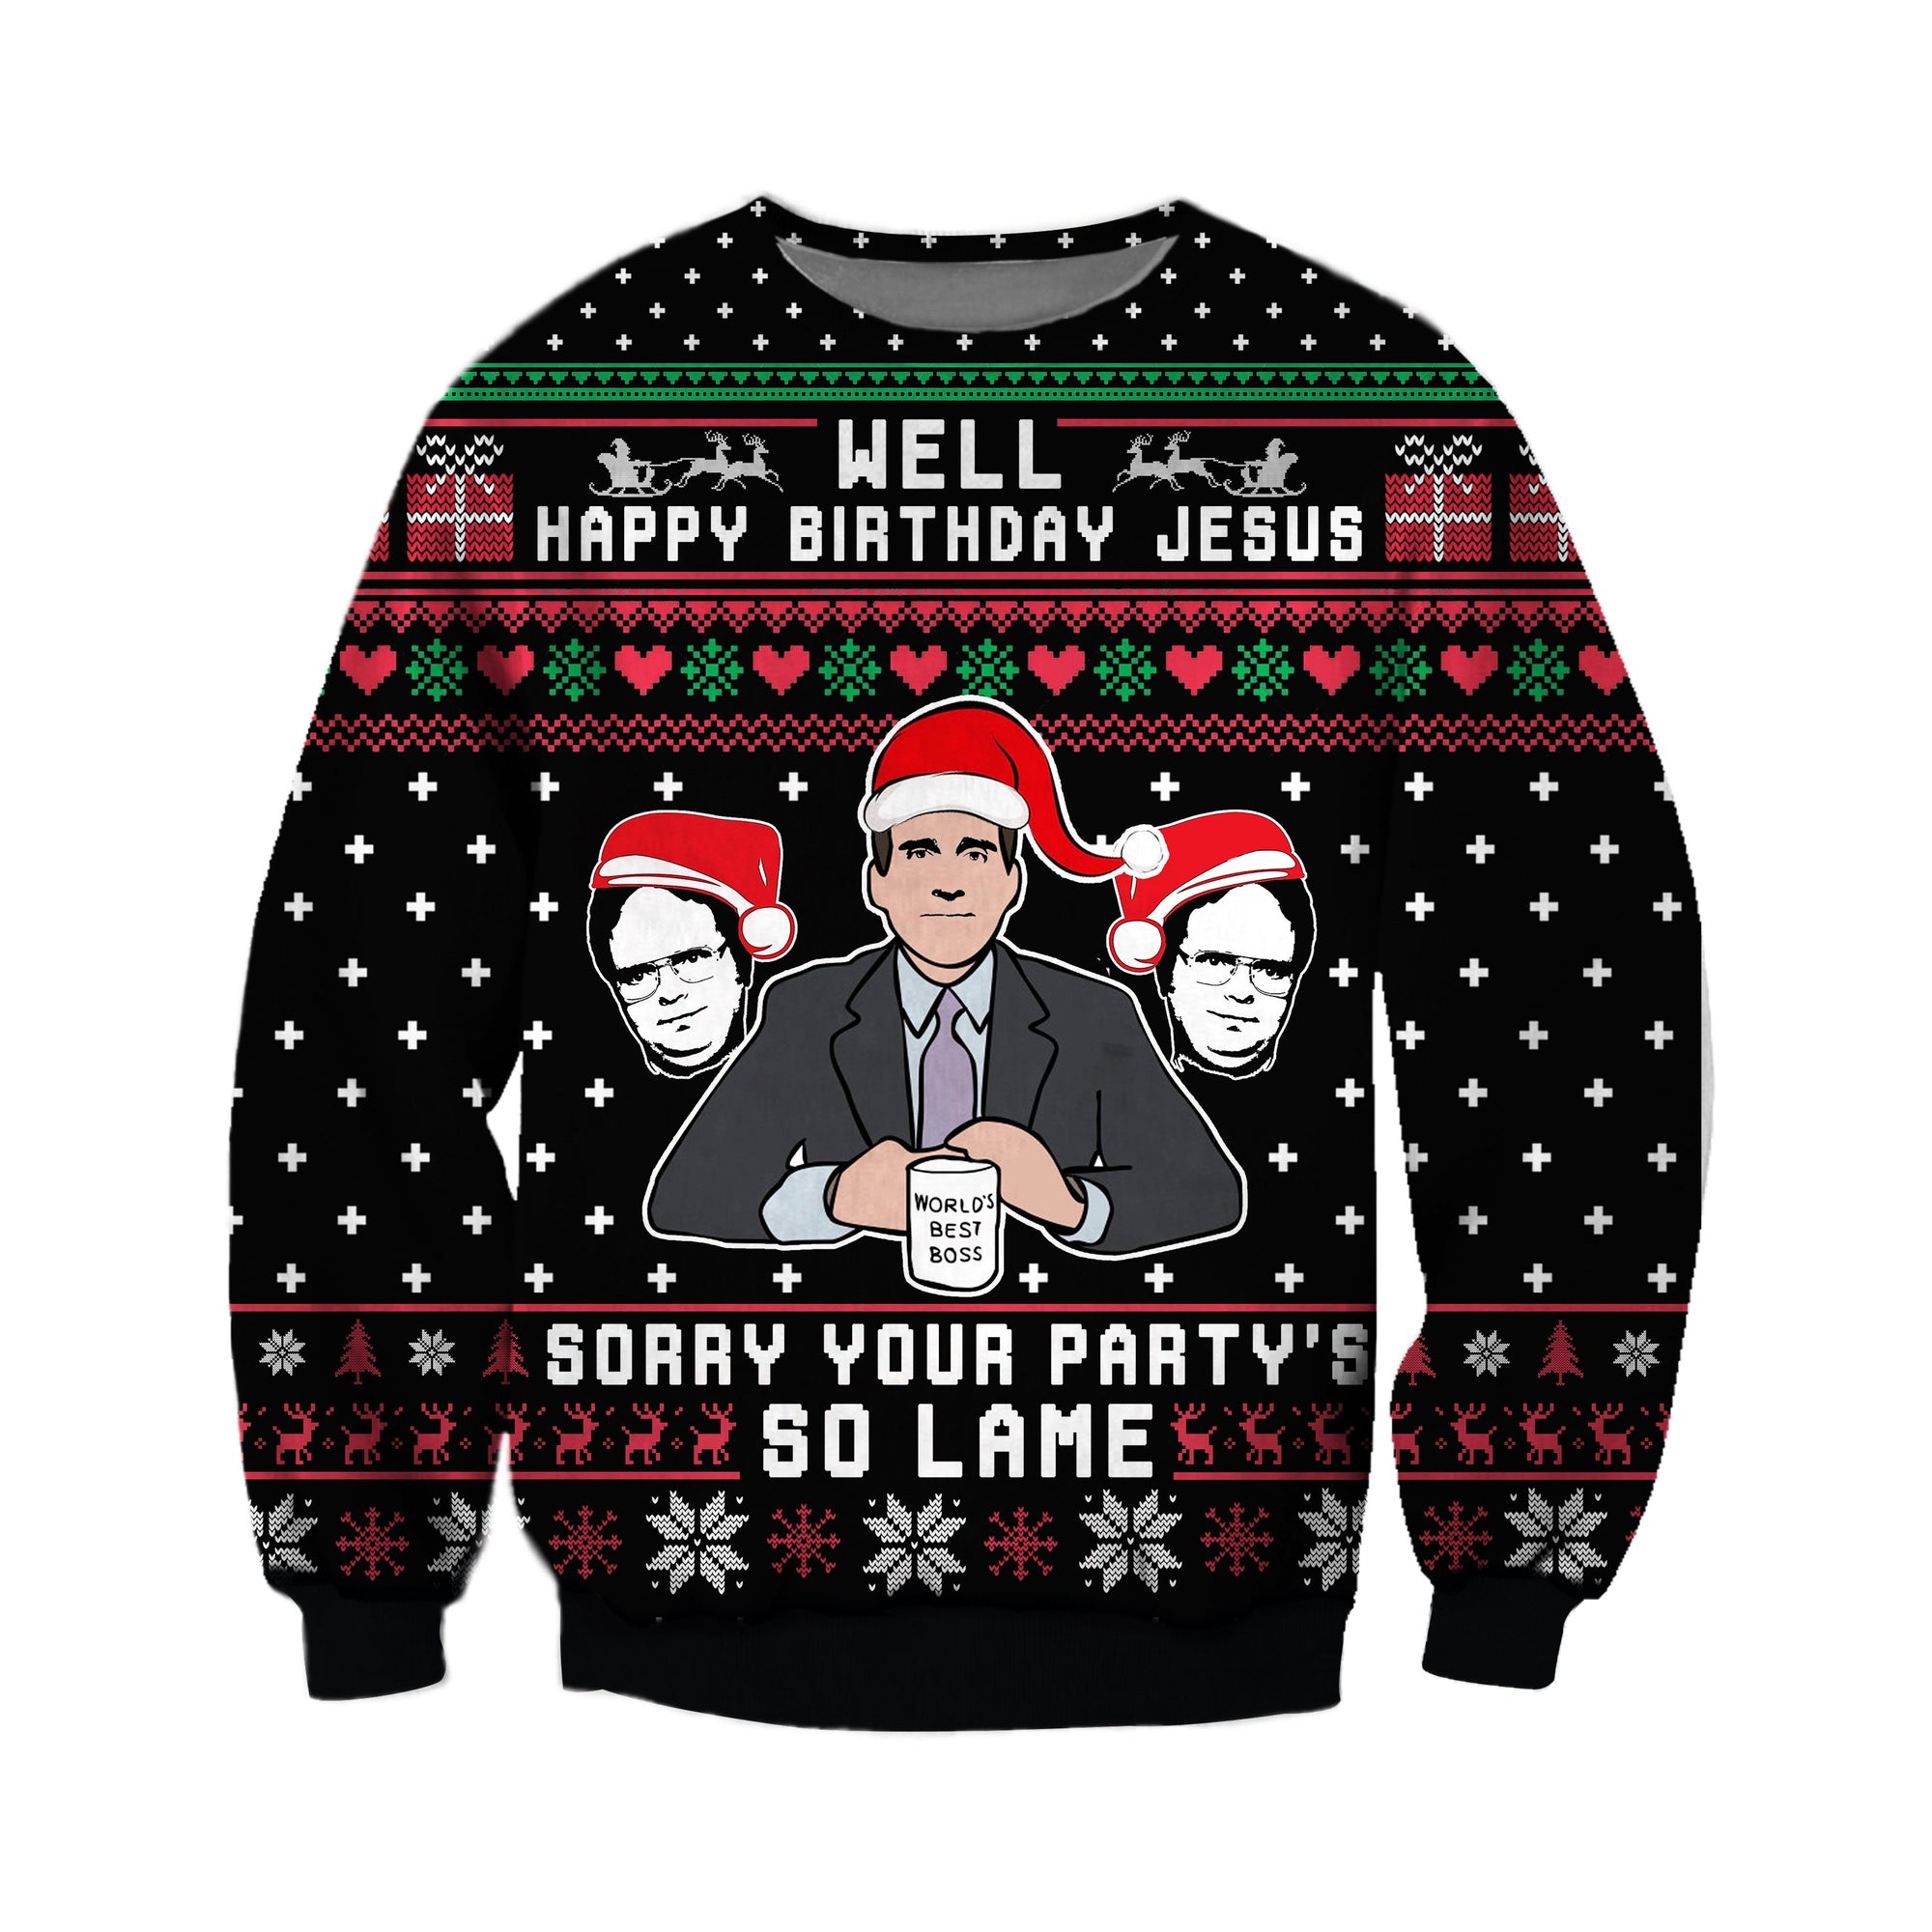 Your Partys So Lame Knitting Pattern 3D Print Ugly Christmas Sweater Hoodie All Over Printed Cint10656